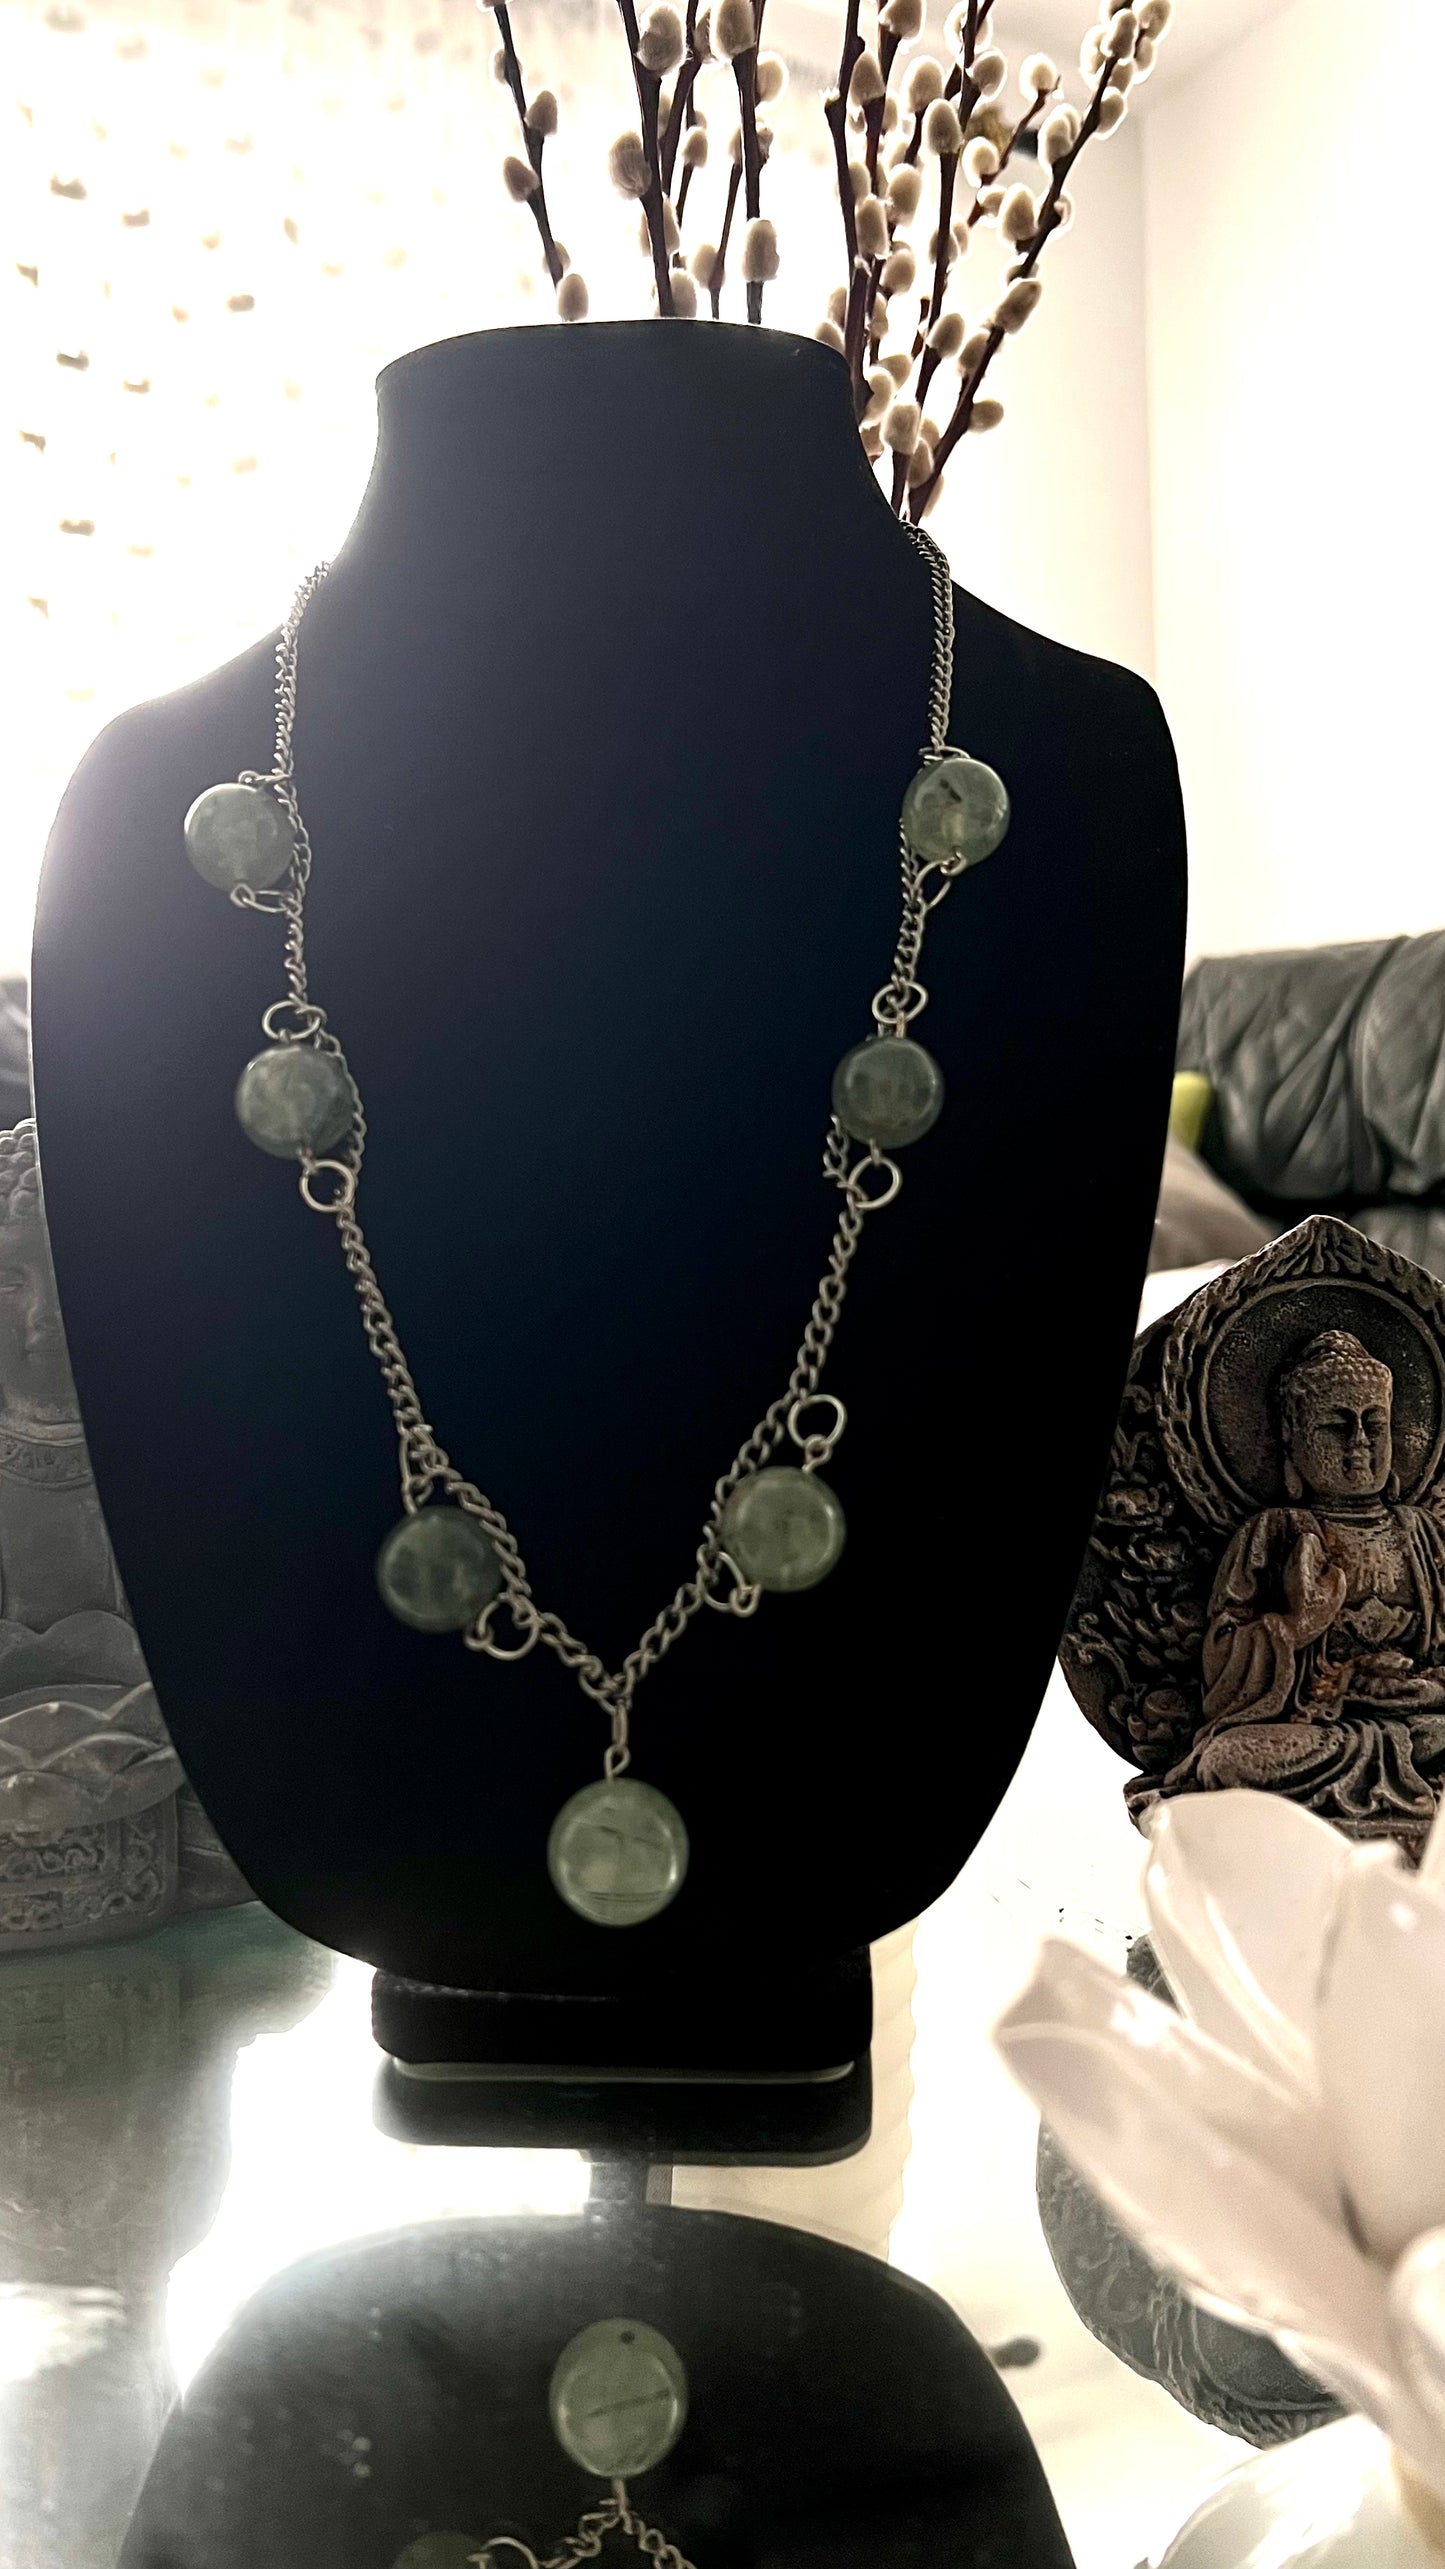 Prehnite Necklace- "stone of dreaming"; it is believed to increase the power of the dream state